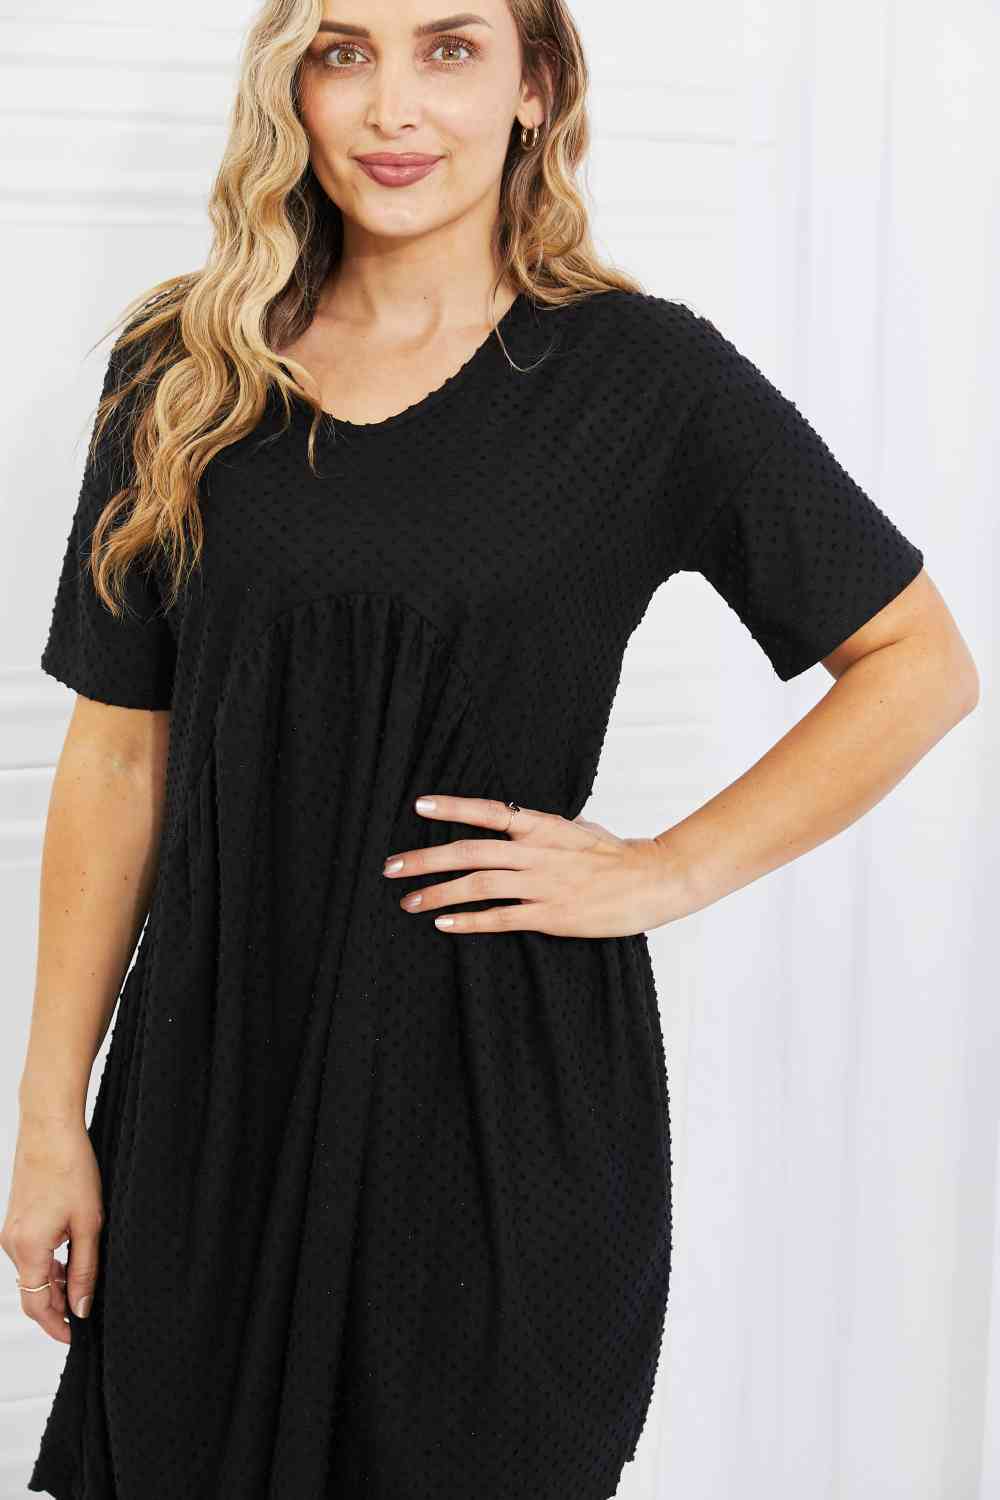 BOMBOM Another Day Swiss Dot Casual Dress in Black